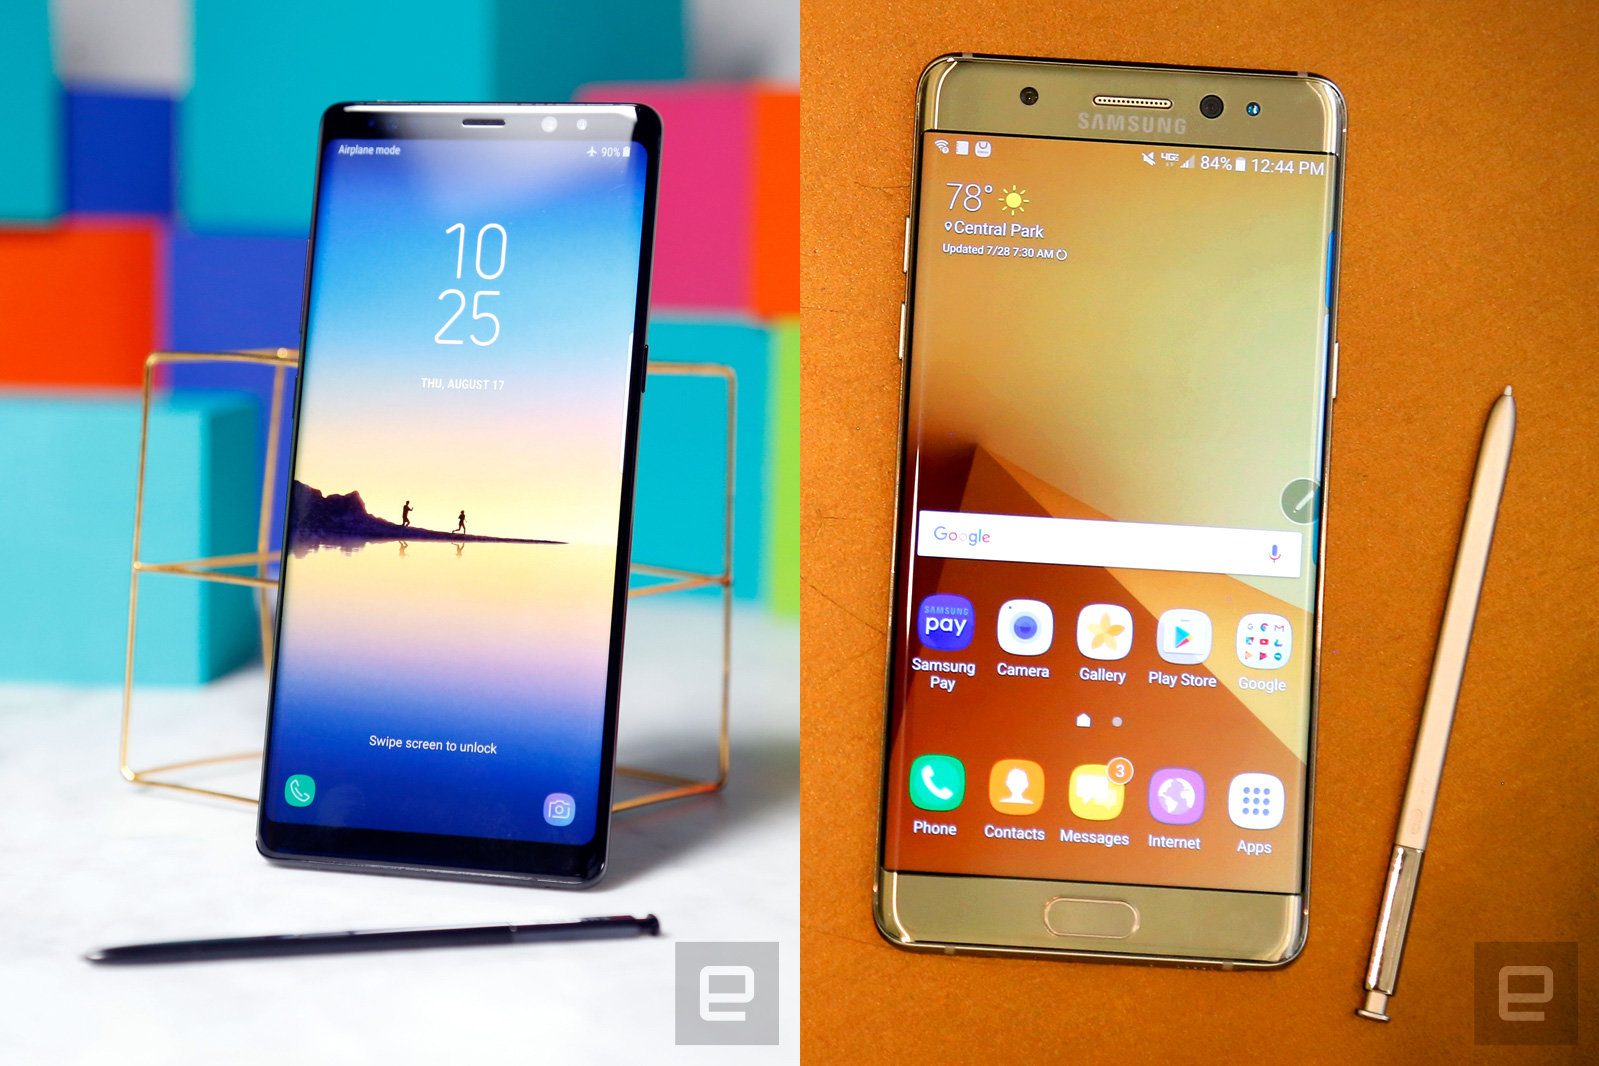 Samsung Galaxy Note 8 colors: all the shades confirmed | TechRadar